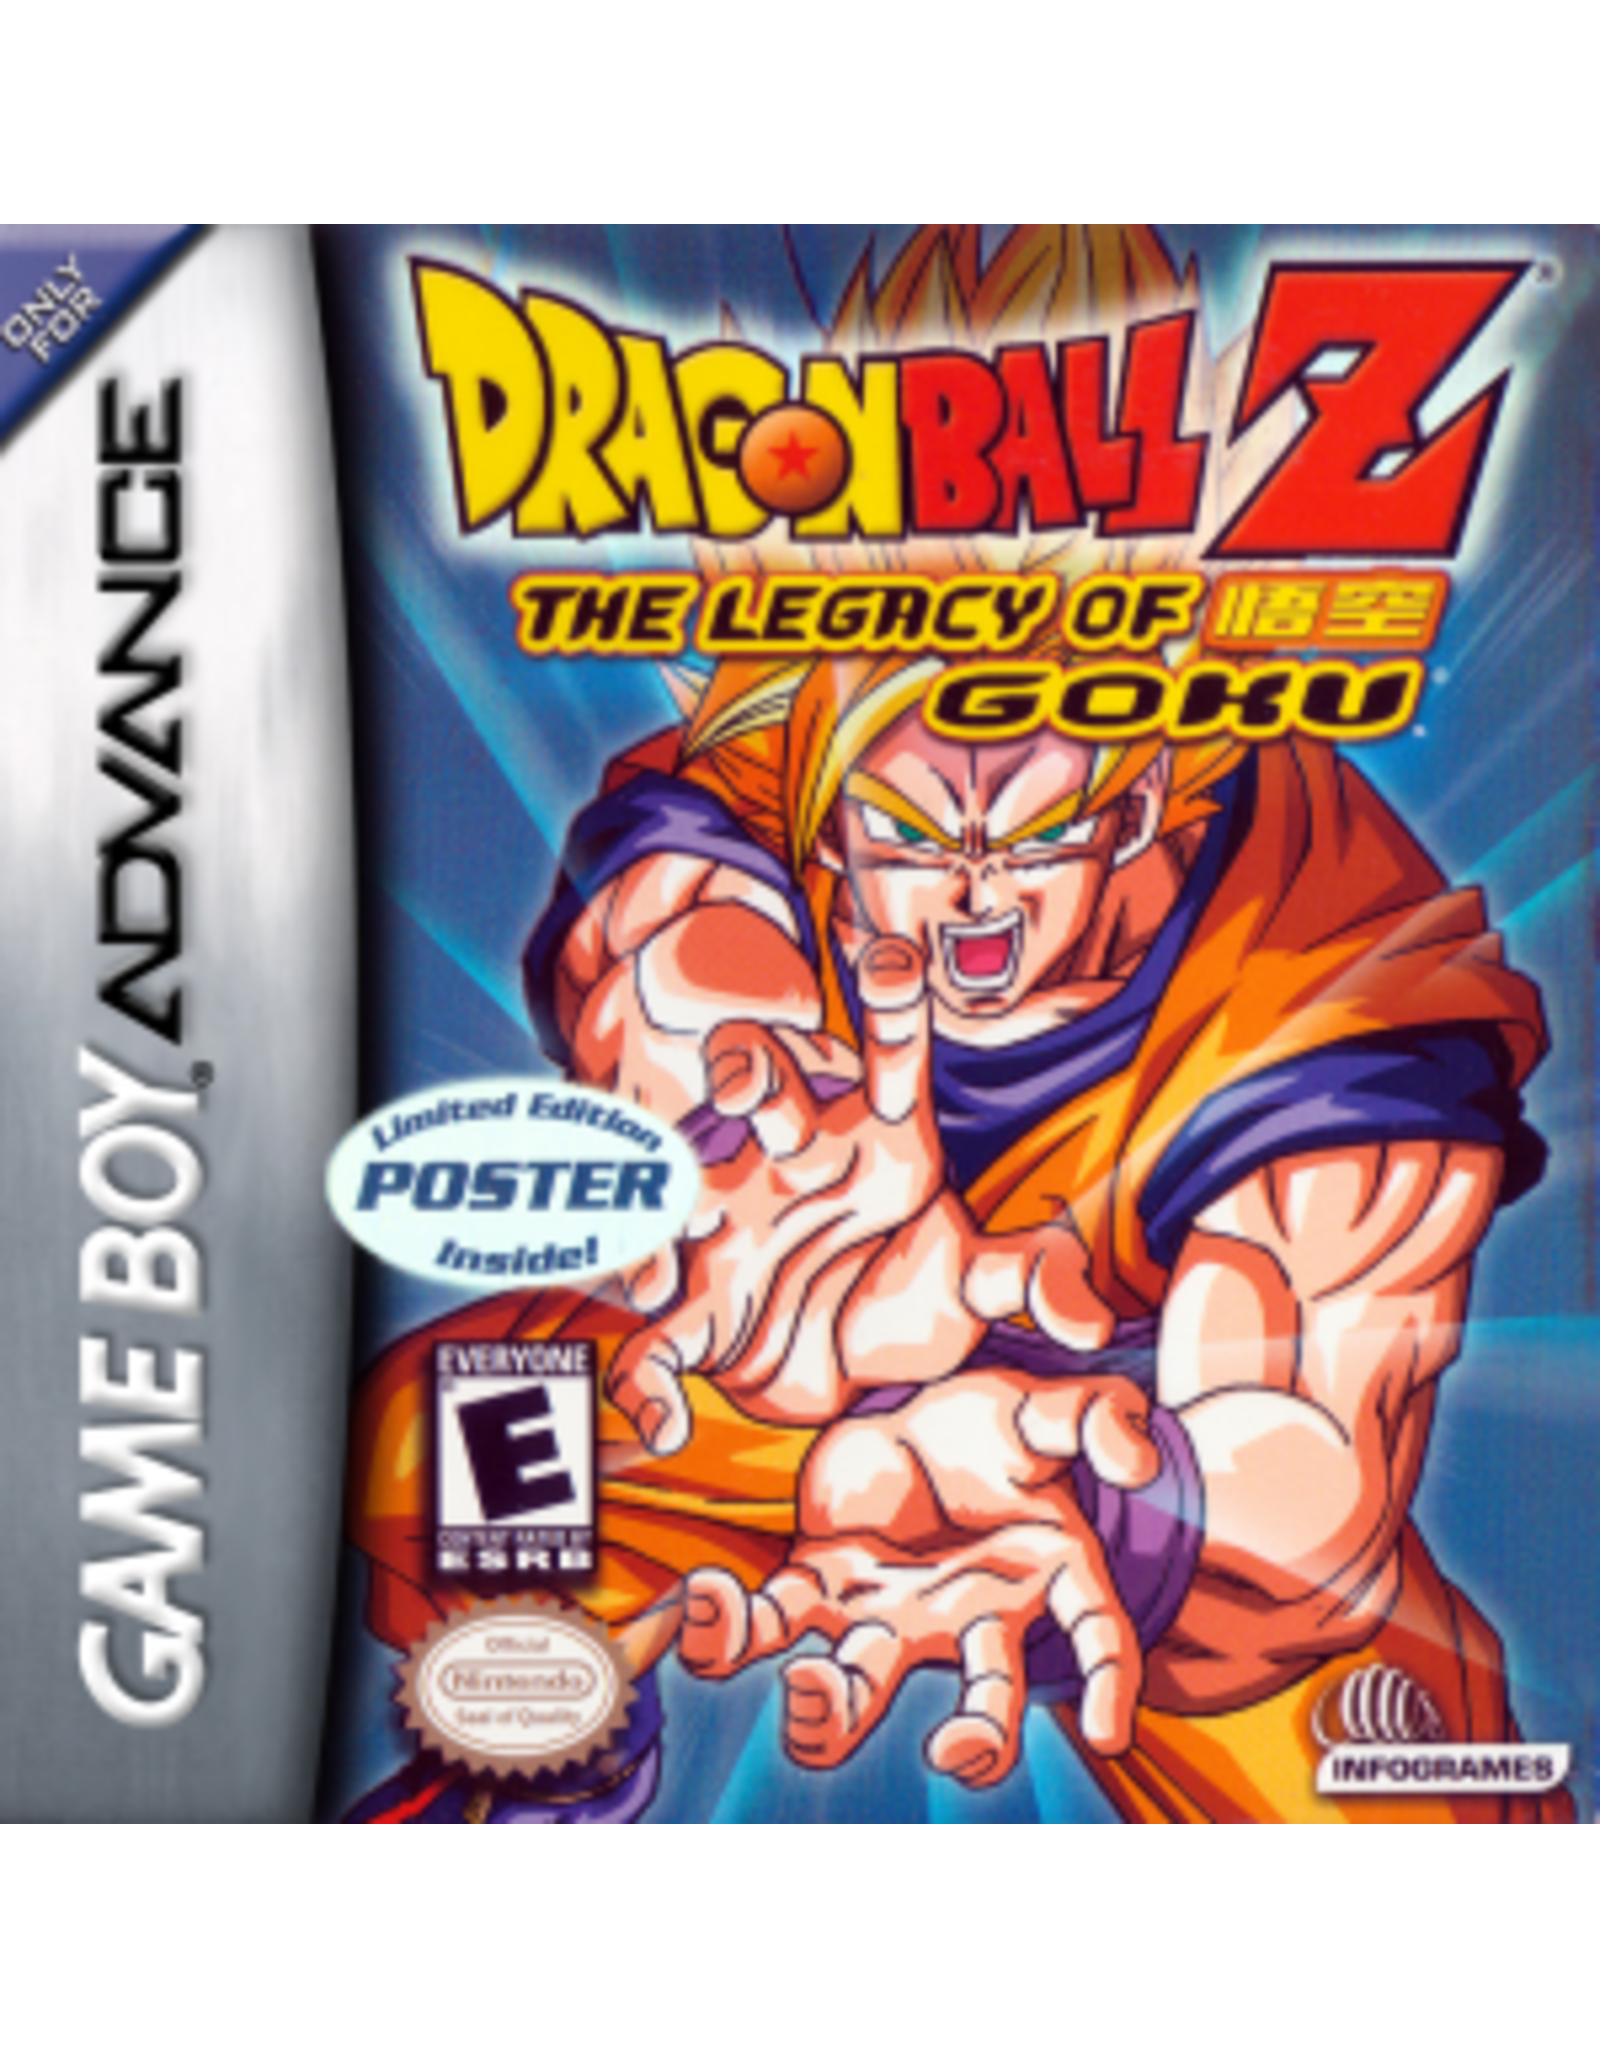 Game Boy Advance Dragon Ball Z Legacy of Goku (Used, Cart Only)